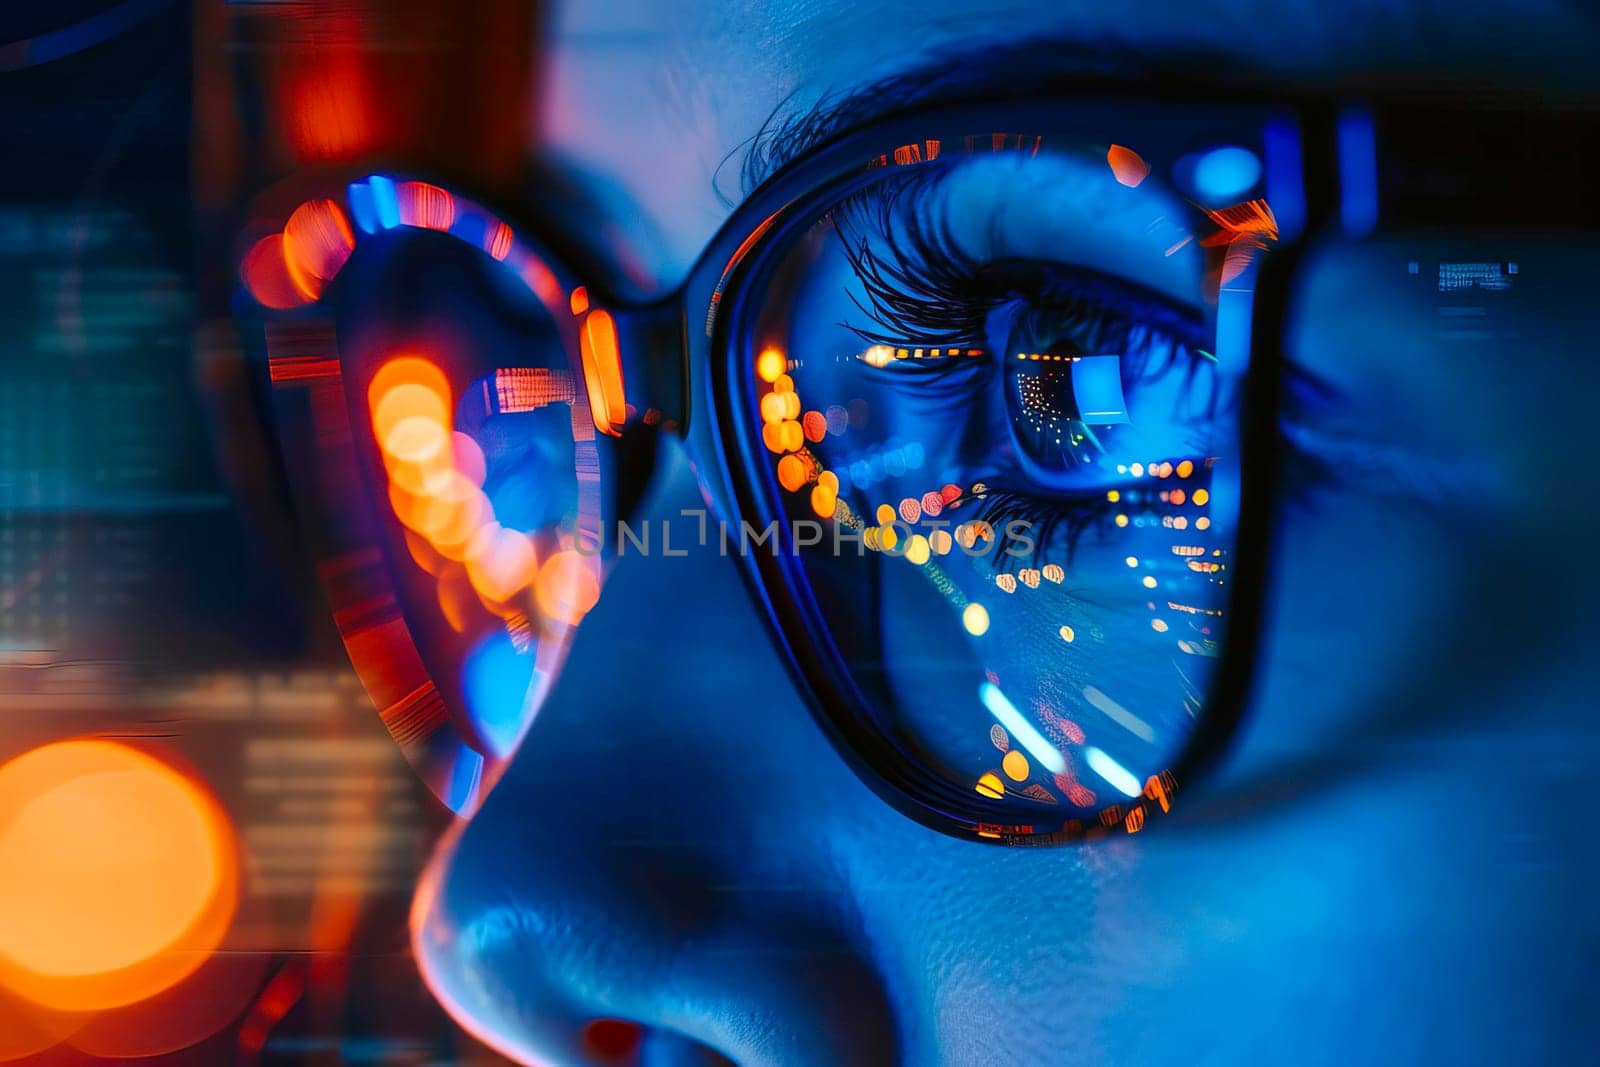 Close-up view of a persons eyes with glasses, looking at a computer monitor.